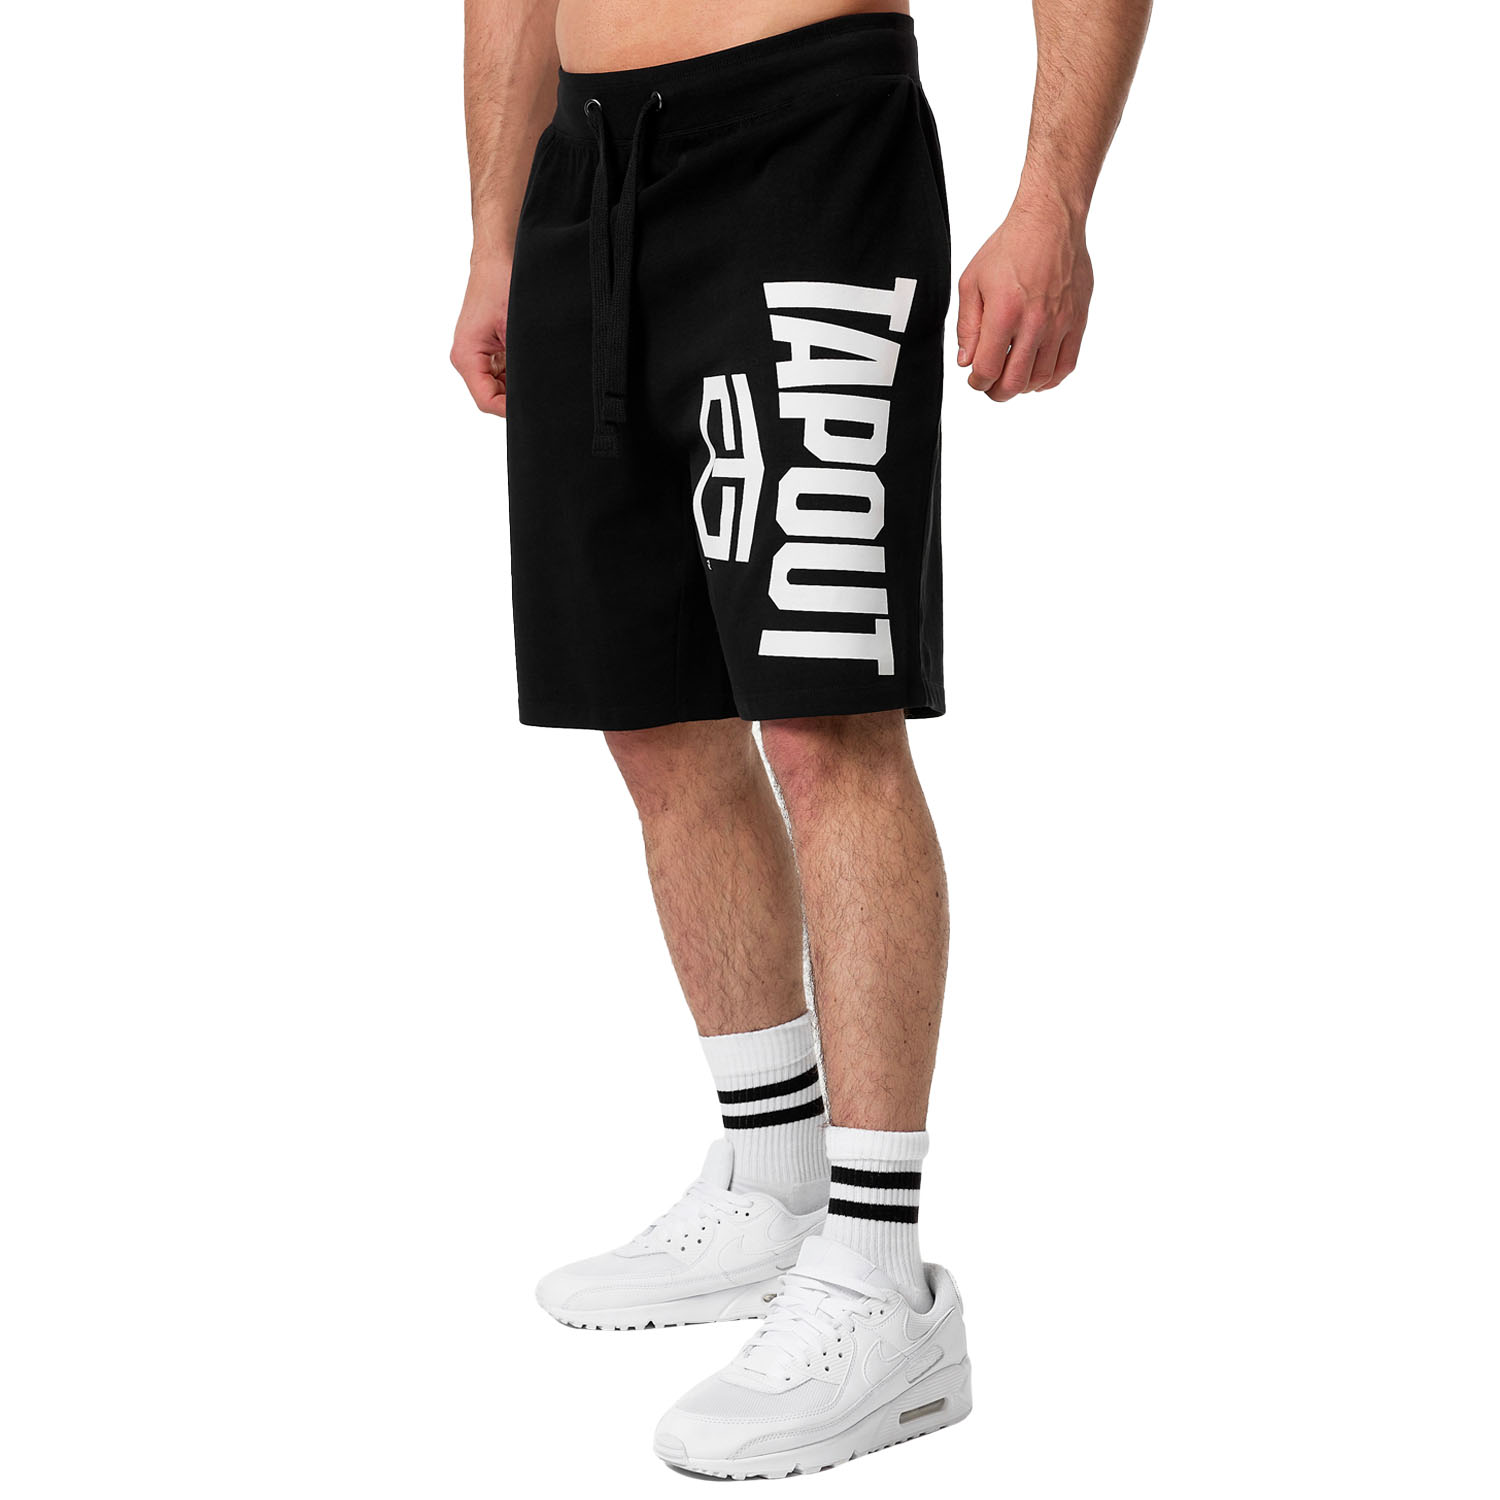 Tapout Fitness Shorts, Active Basic, black-white